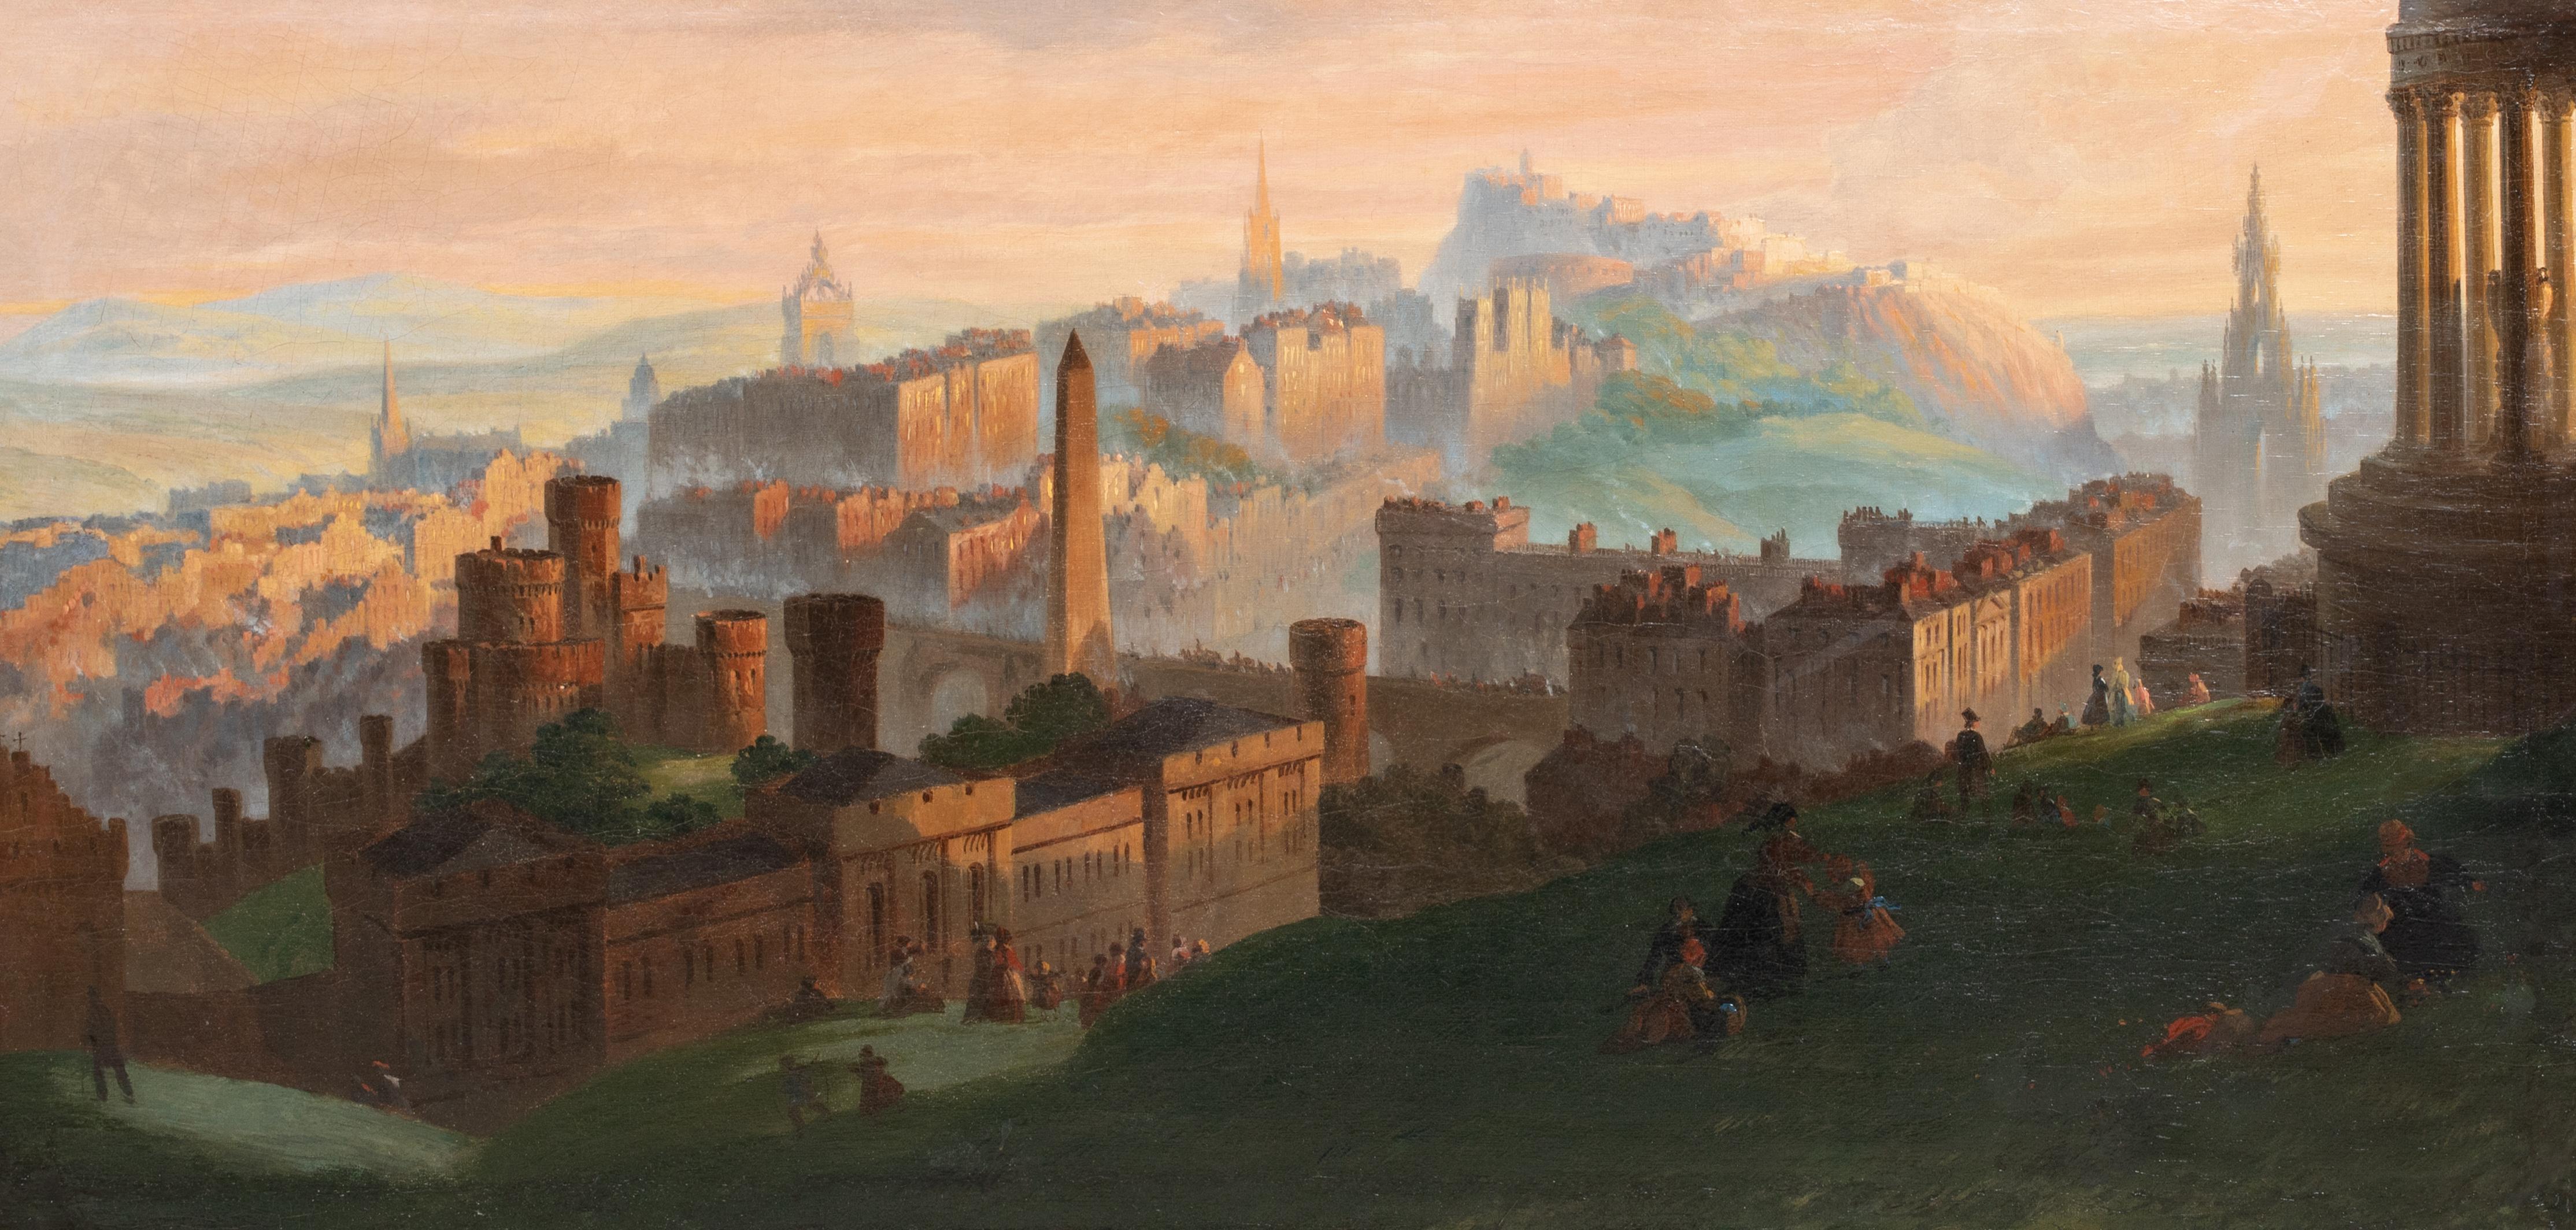 Edinburgh From Carlton Hill, 19th Century

Thomas Grant (19th Century, British)

Large 19th Century view of Edinburgh at sunset from Carlton Hill, oil on canvas by Thomas Grant. Extensive panoramic view at the close of the day as well dressed